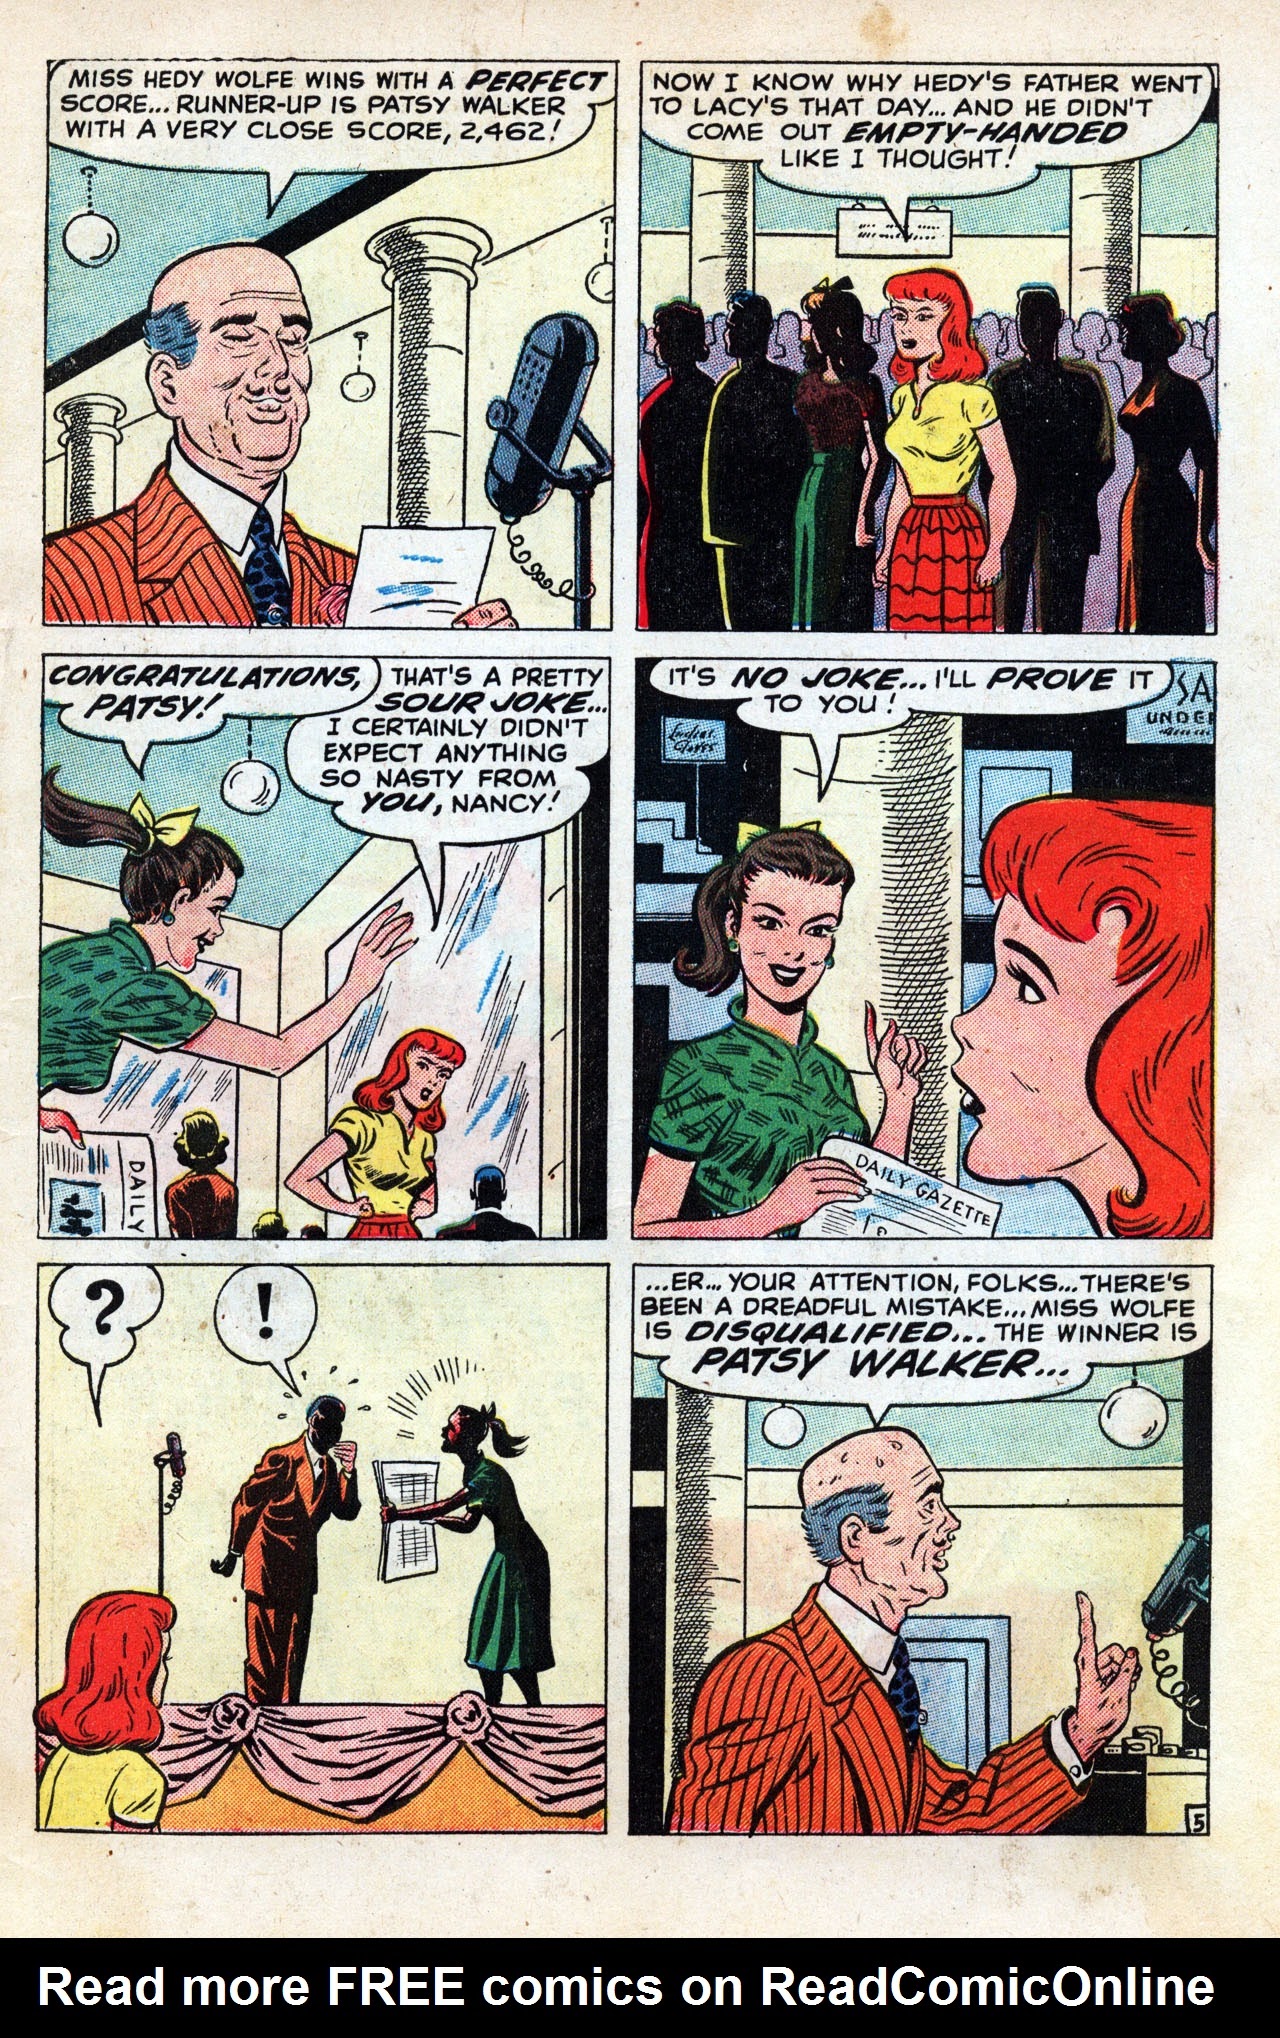 Read online Patsy and Hedy comic -  Issue #17 - 31